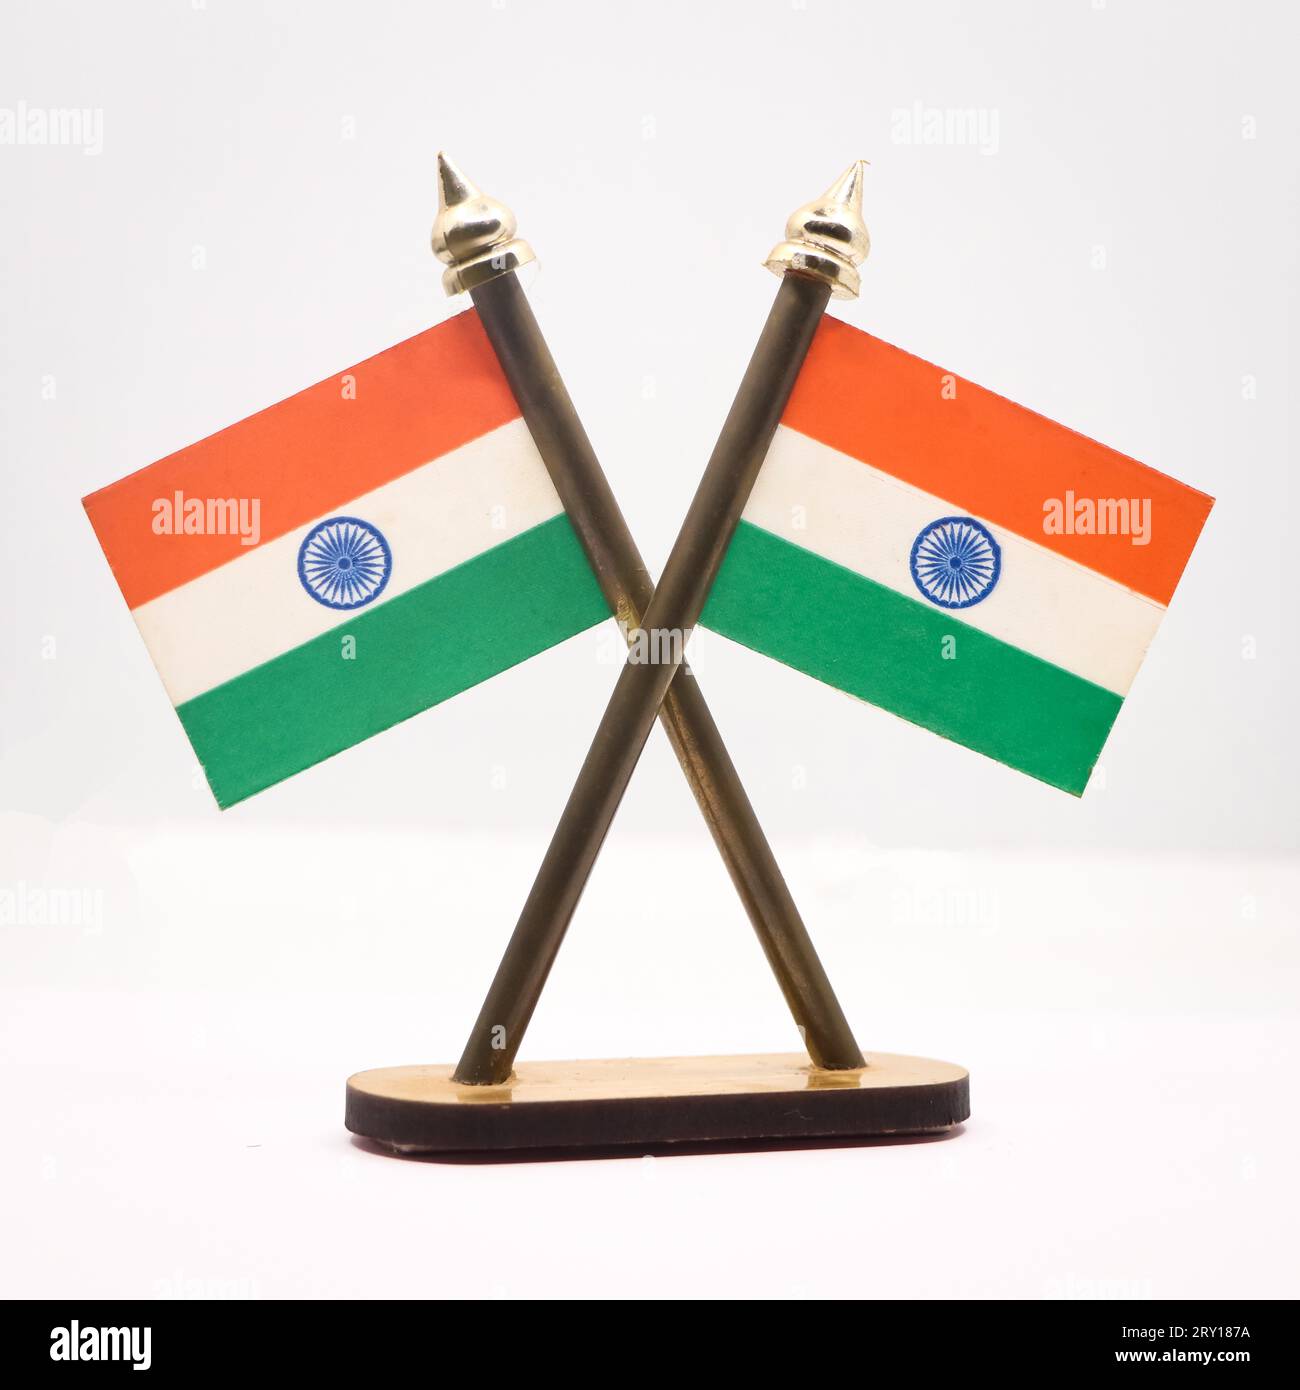 The national flag of India in republic tricolors with the ashoka chakra fixed on two poles isolated in a white background Stock Photo